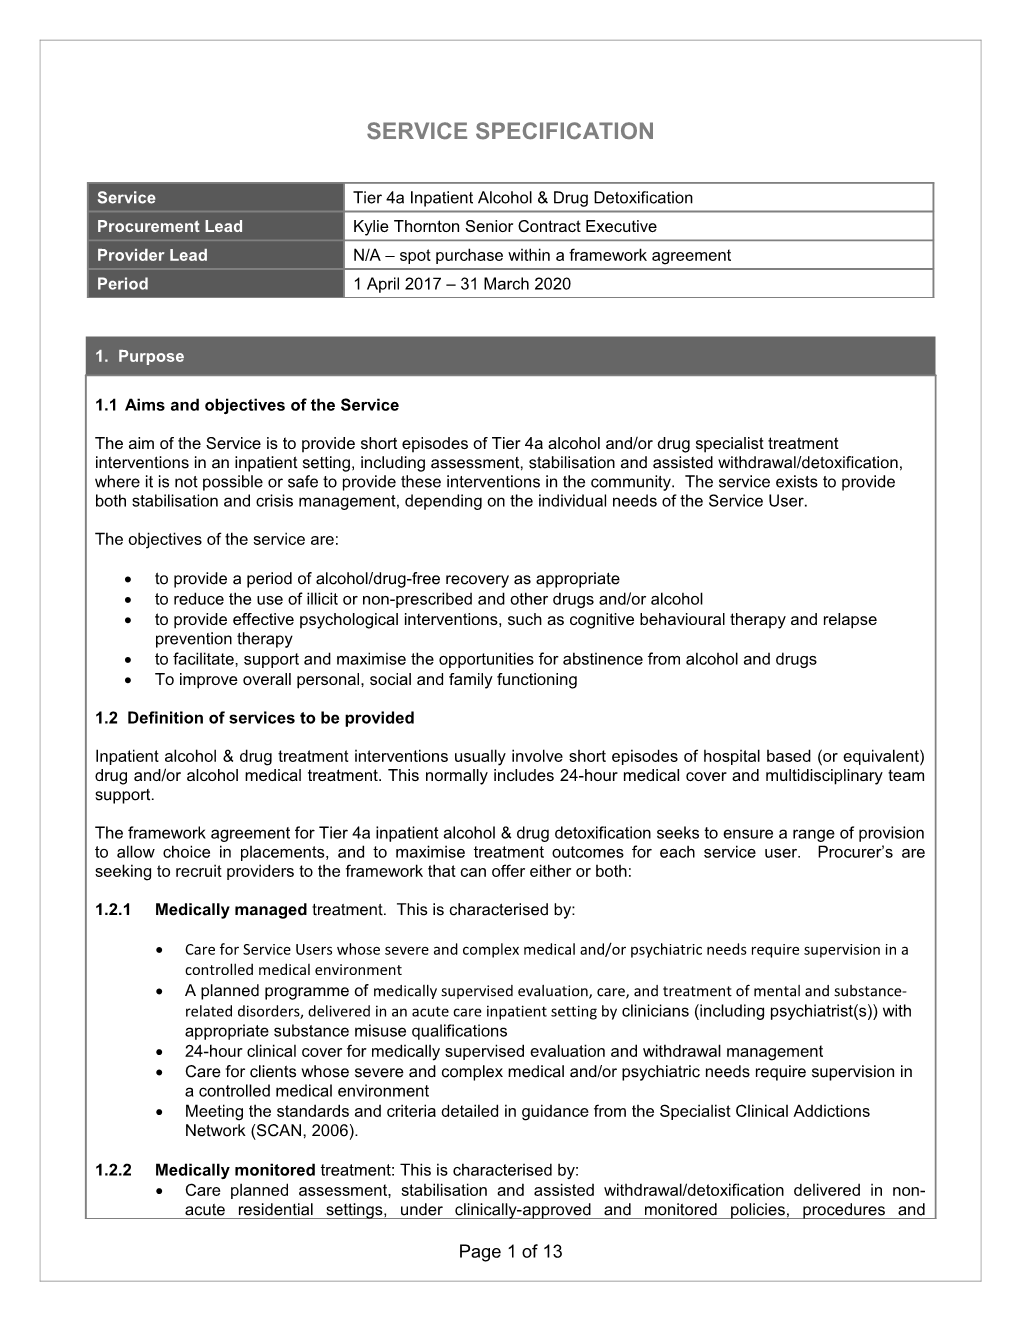 Service Specification Template Guidance Notes for Completion